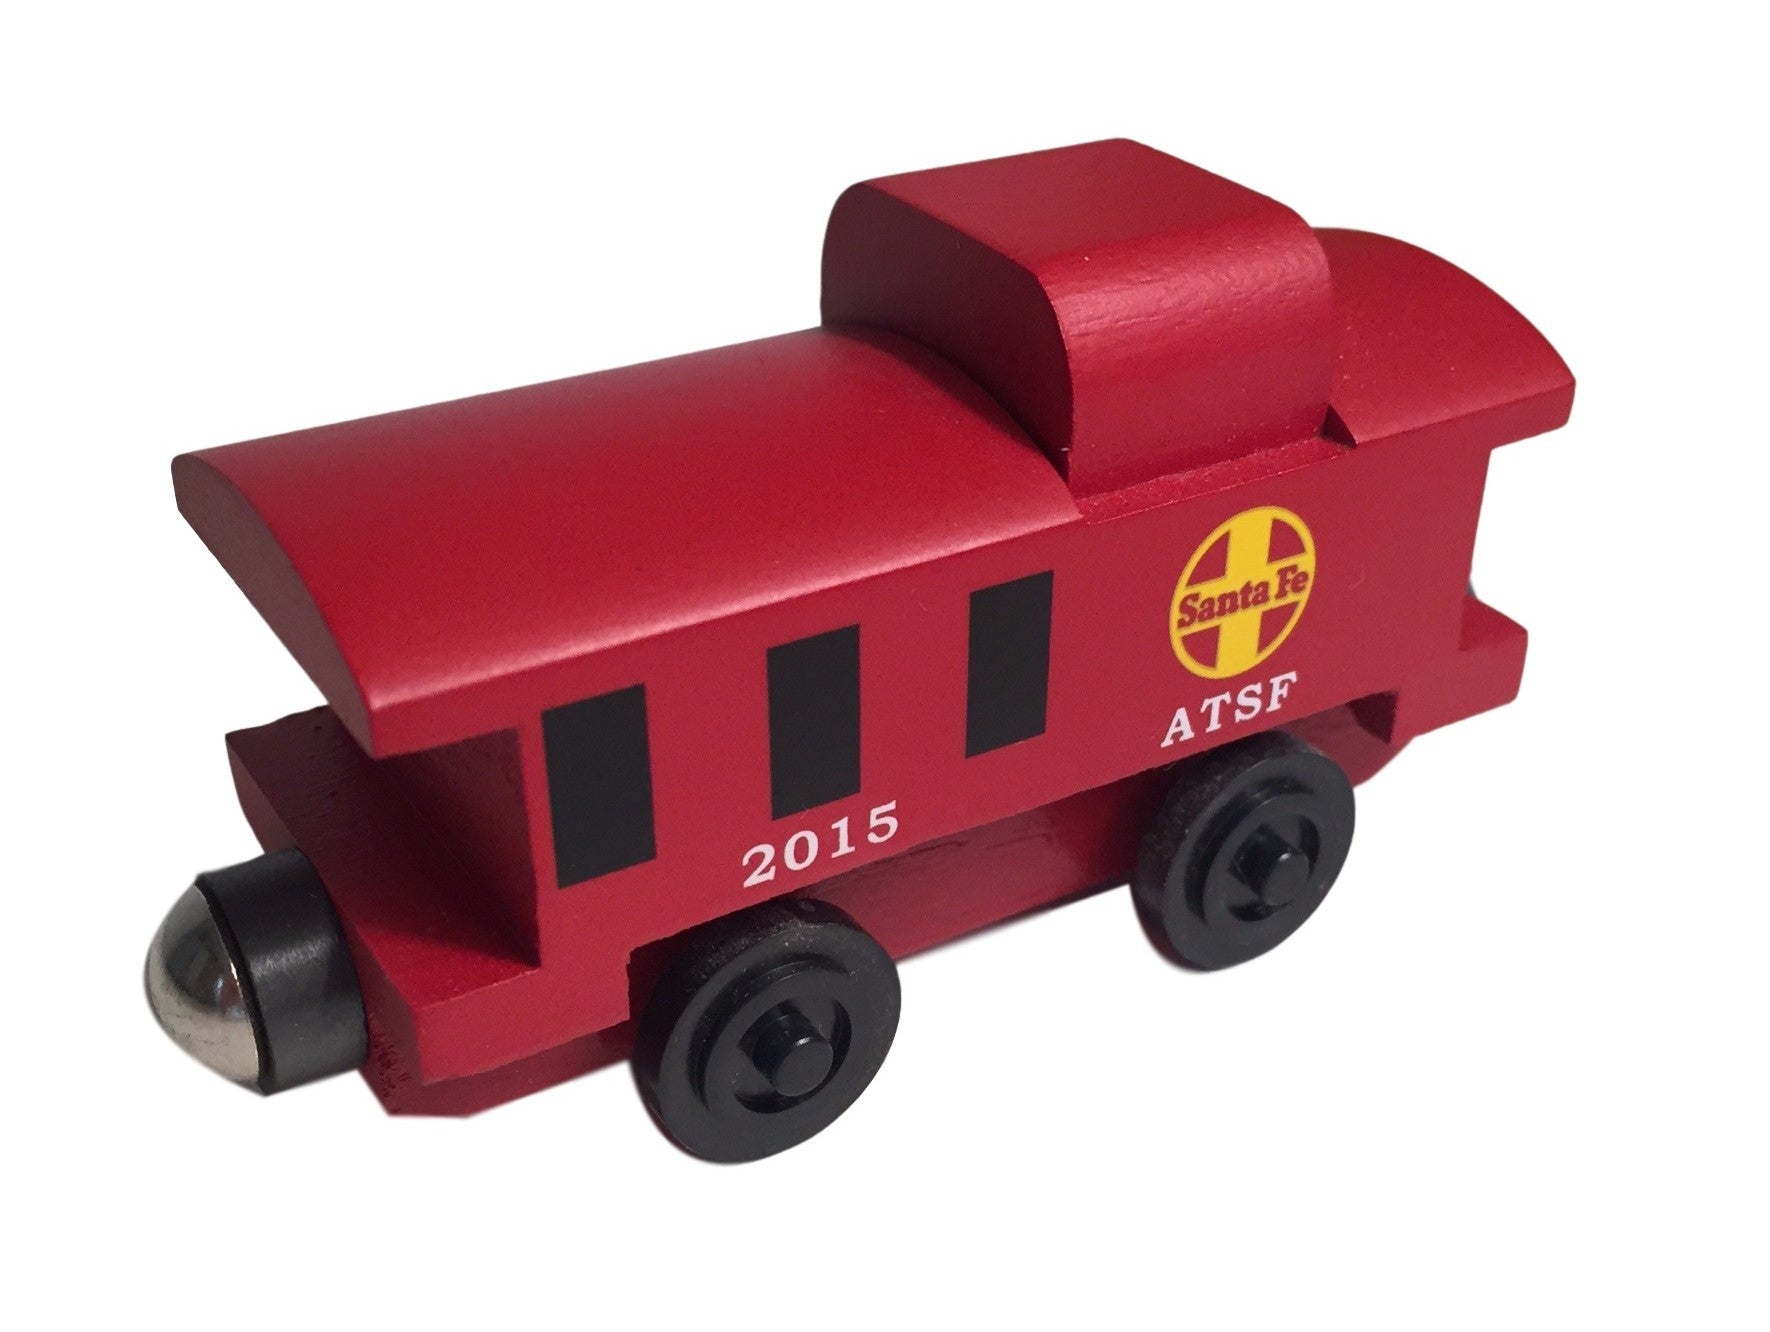 toy caboose